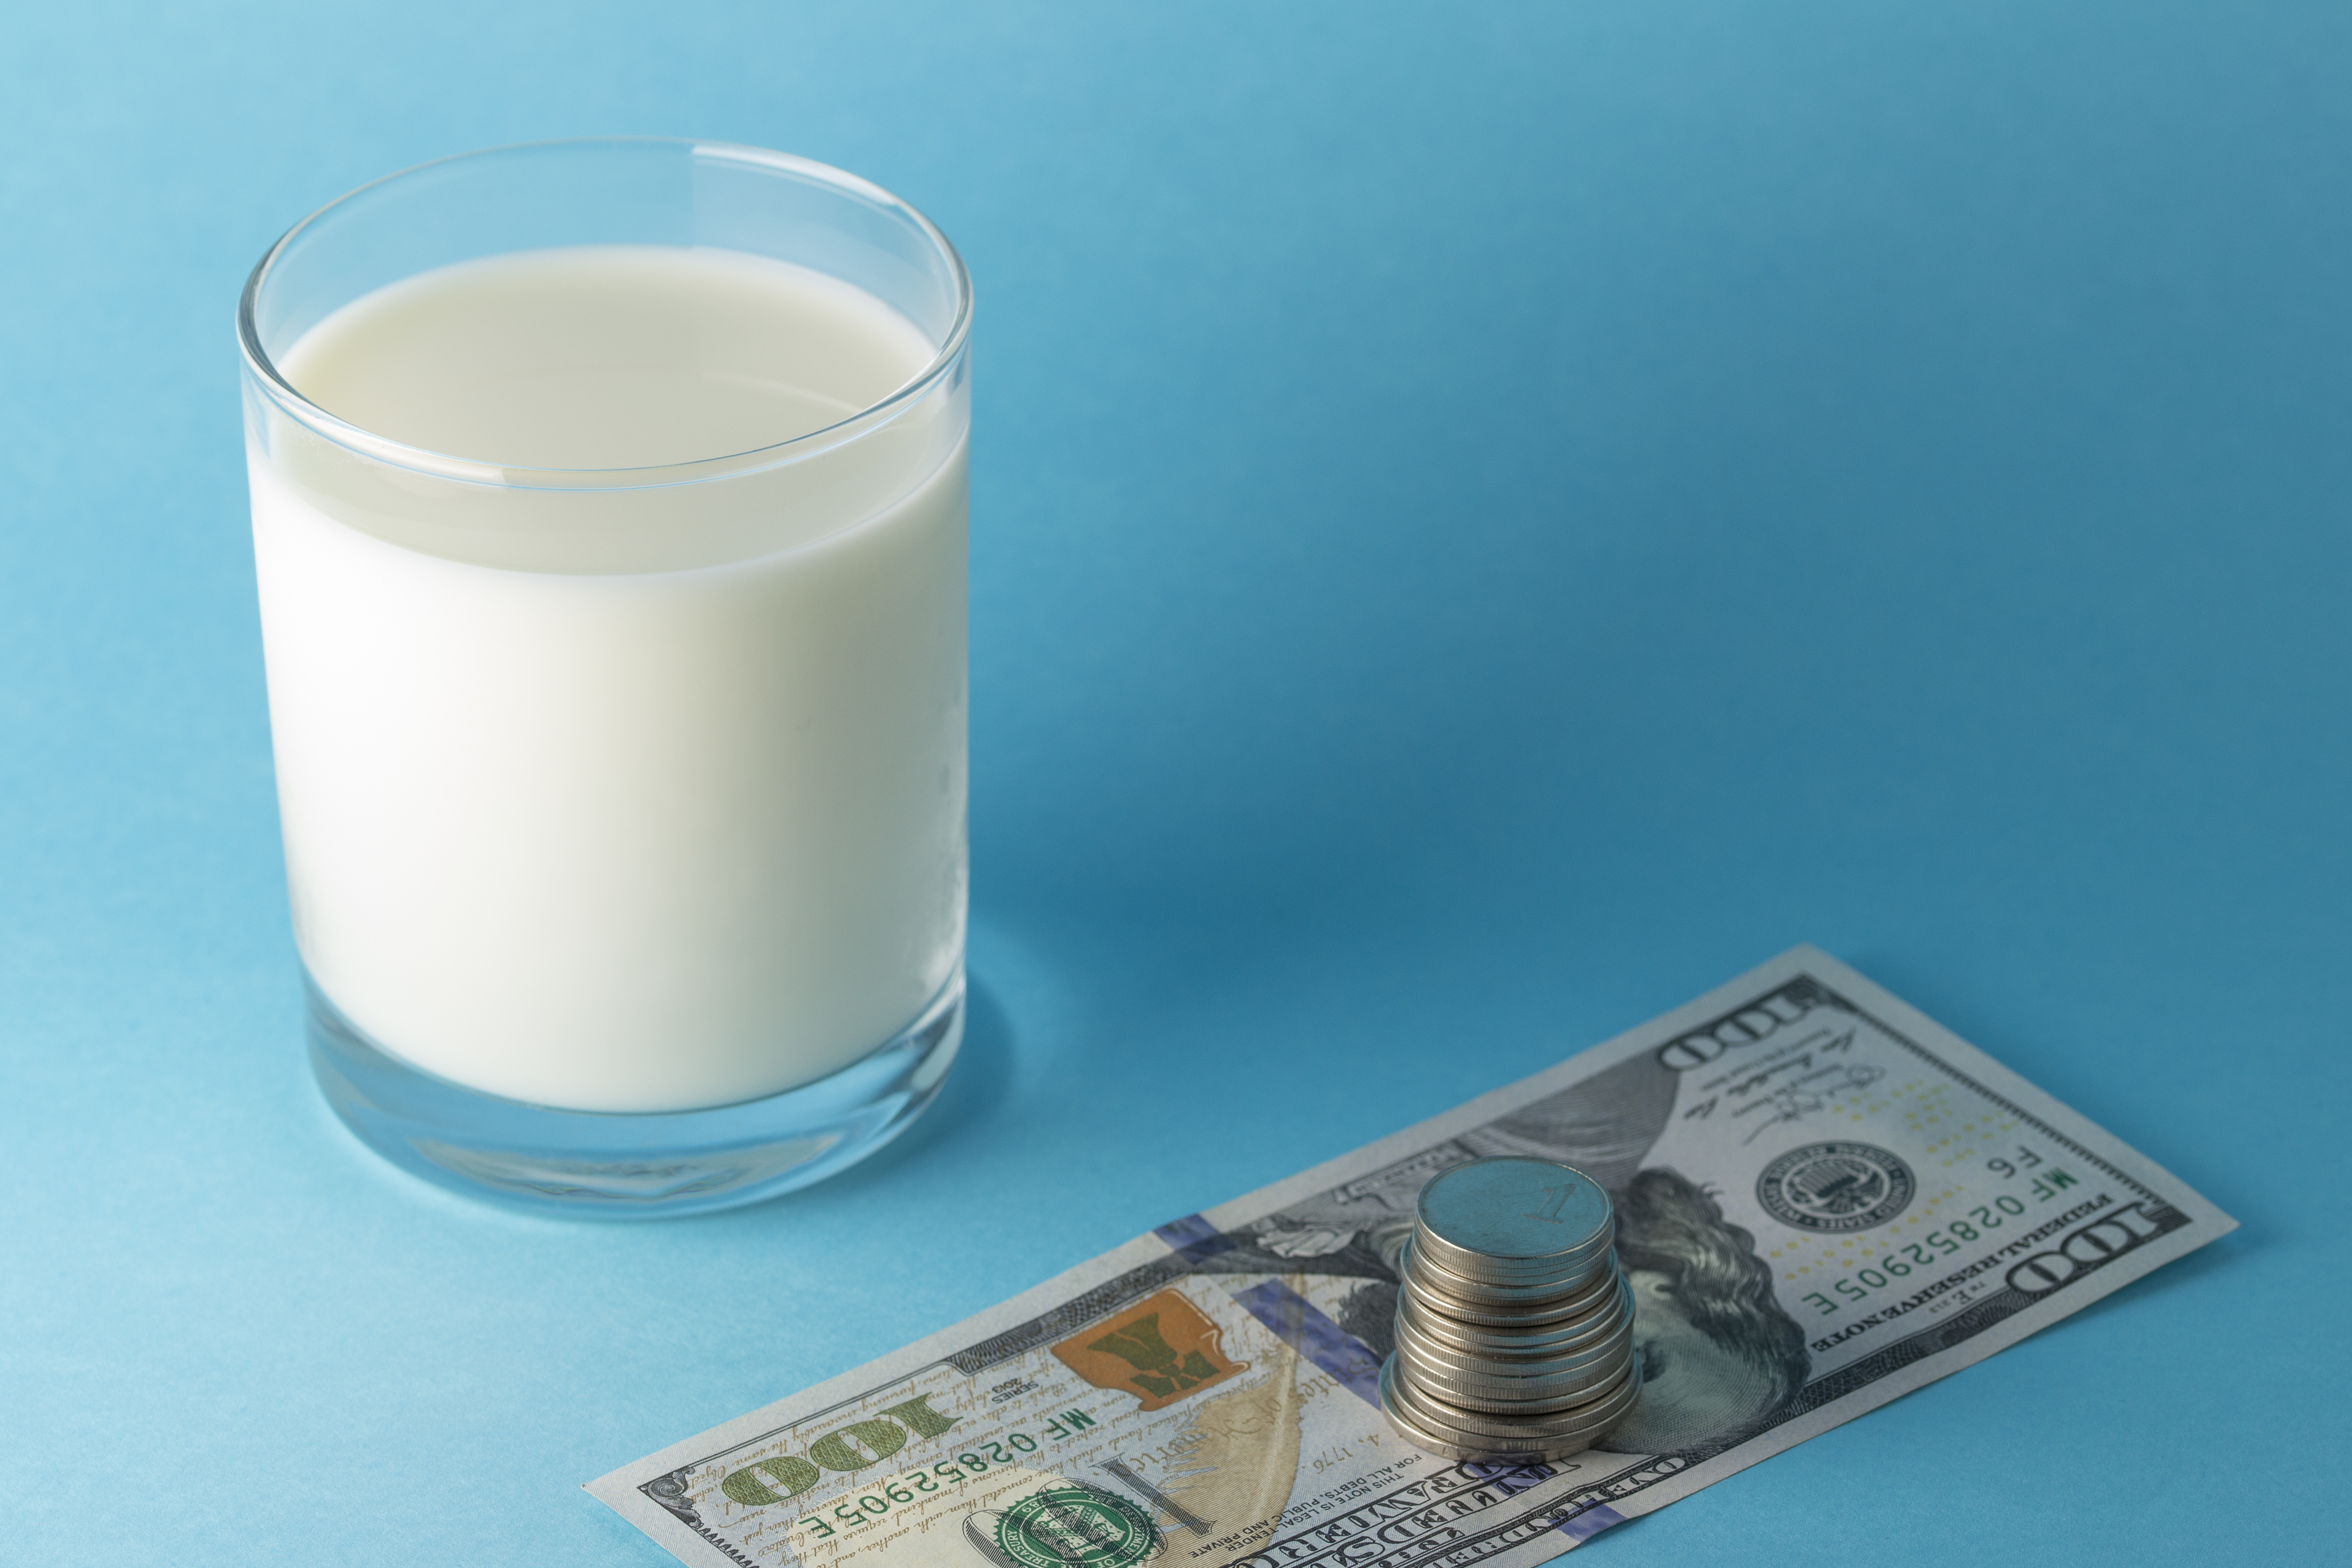 Glass of milk on a light blue surface, next to a U.S. $100 pill with a stack of coins set atop it.